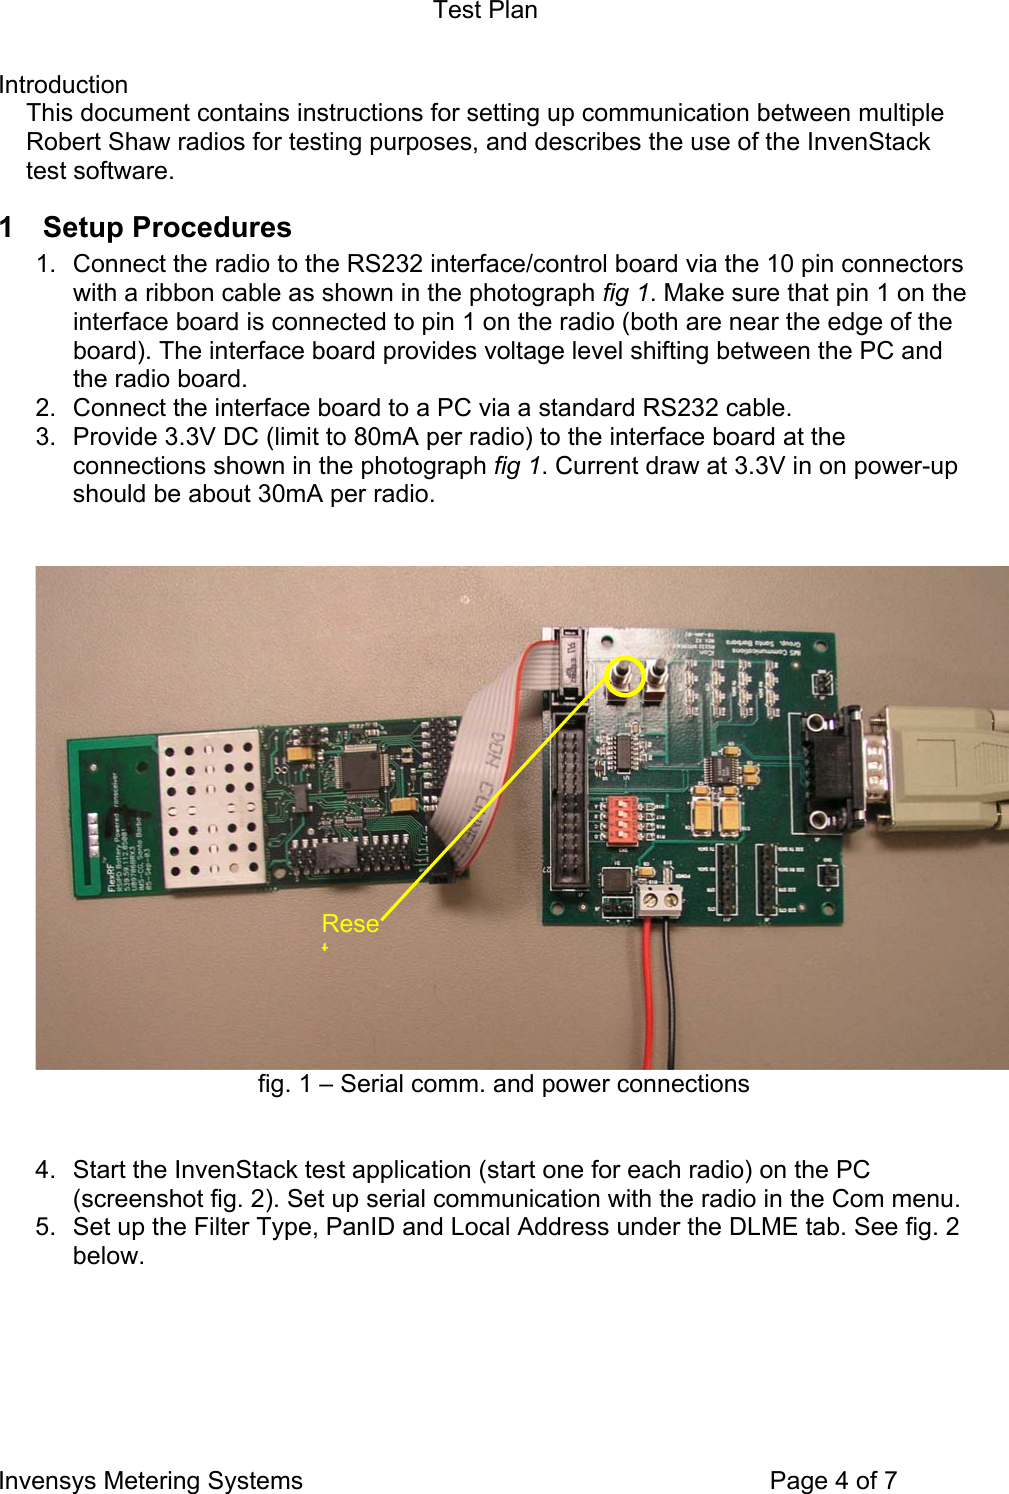 Test Plan Invensys Metering Systems    Page 4 of 7 Introduction This document contains instructions for setting up communication between multiple Robert Shaw radios for testing purposes, and describes the use of the InvenStack test software. 1 Setup Procedures 1.  Connect the radio to the RS232 interface/control board via the 10 pin connectors with a ribbon cable as shown in the photograph fig 1. Make sure that pin 1 on the interface board is connected to pin 1 on the radio (both are near the edge of the board). The interface board provides voltage level shifting between the PC and the radio board. 2.  Connect the interface board to a PC via a standard RS232 cable. 3.  Provide 3.3V DC (limit to 80mA per radio) to the interface board at the connections shown in the photograph fig 1. Current draw at 3.3V in on power-up should be about 30mA per radio.    fig. 1 – Serial comm. and power connections   4.  Start the InvenStack test application (start one for each radio) on the PC (screenshot fig. 2). Set up serial communication with the radio in the Com menu.  5.  Set up the Filter Type, PanID and Local Address under the DLME tab. See fig. 2 below.  Reset